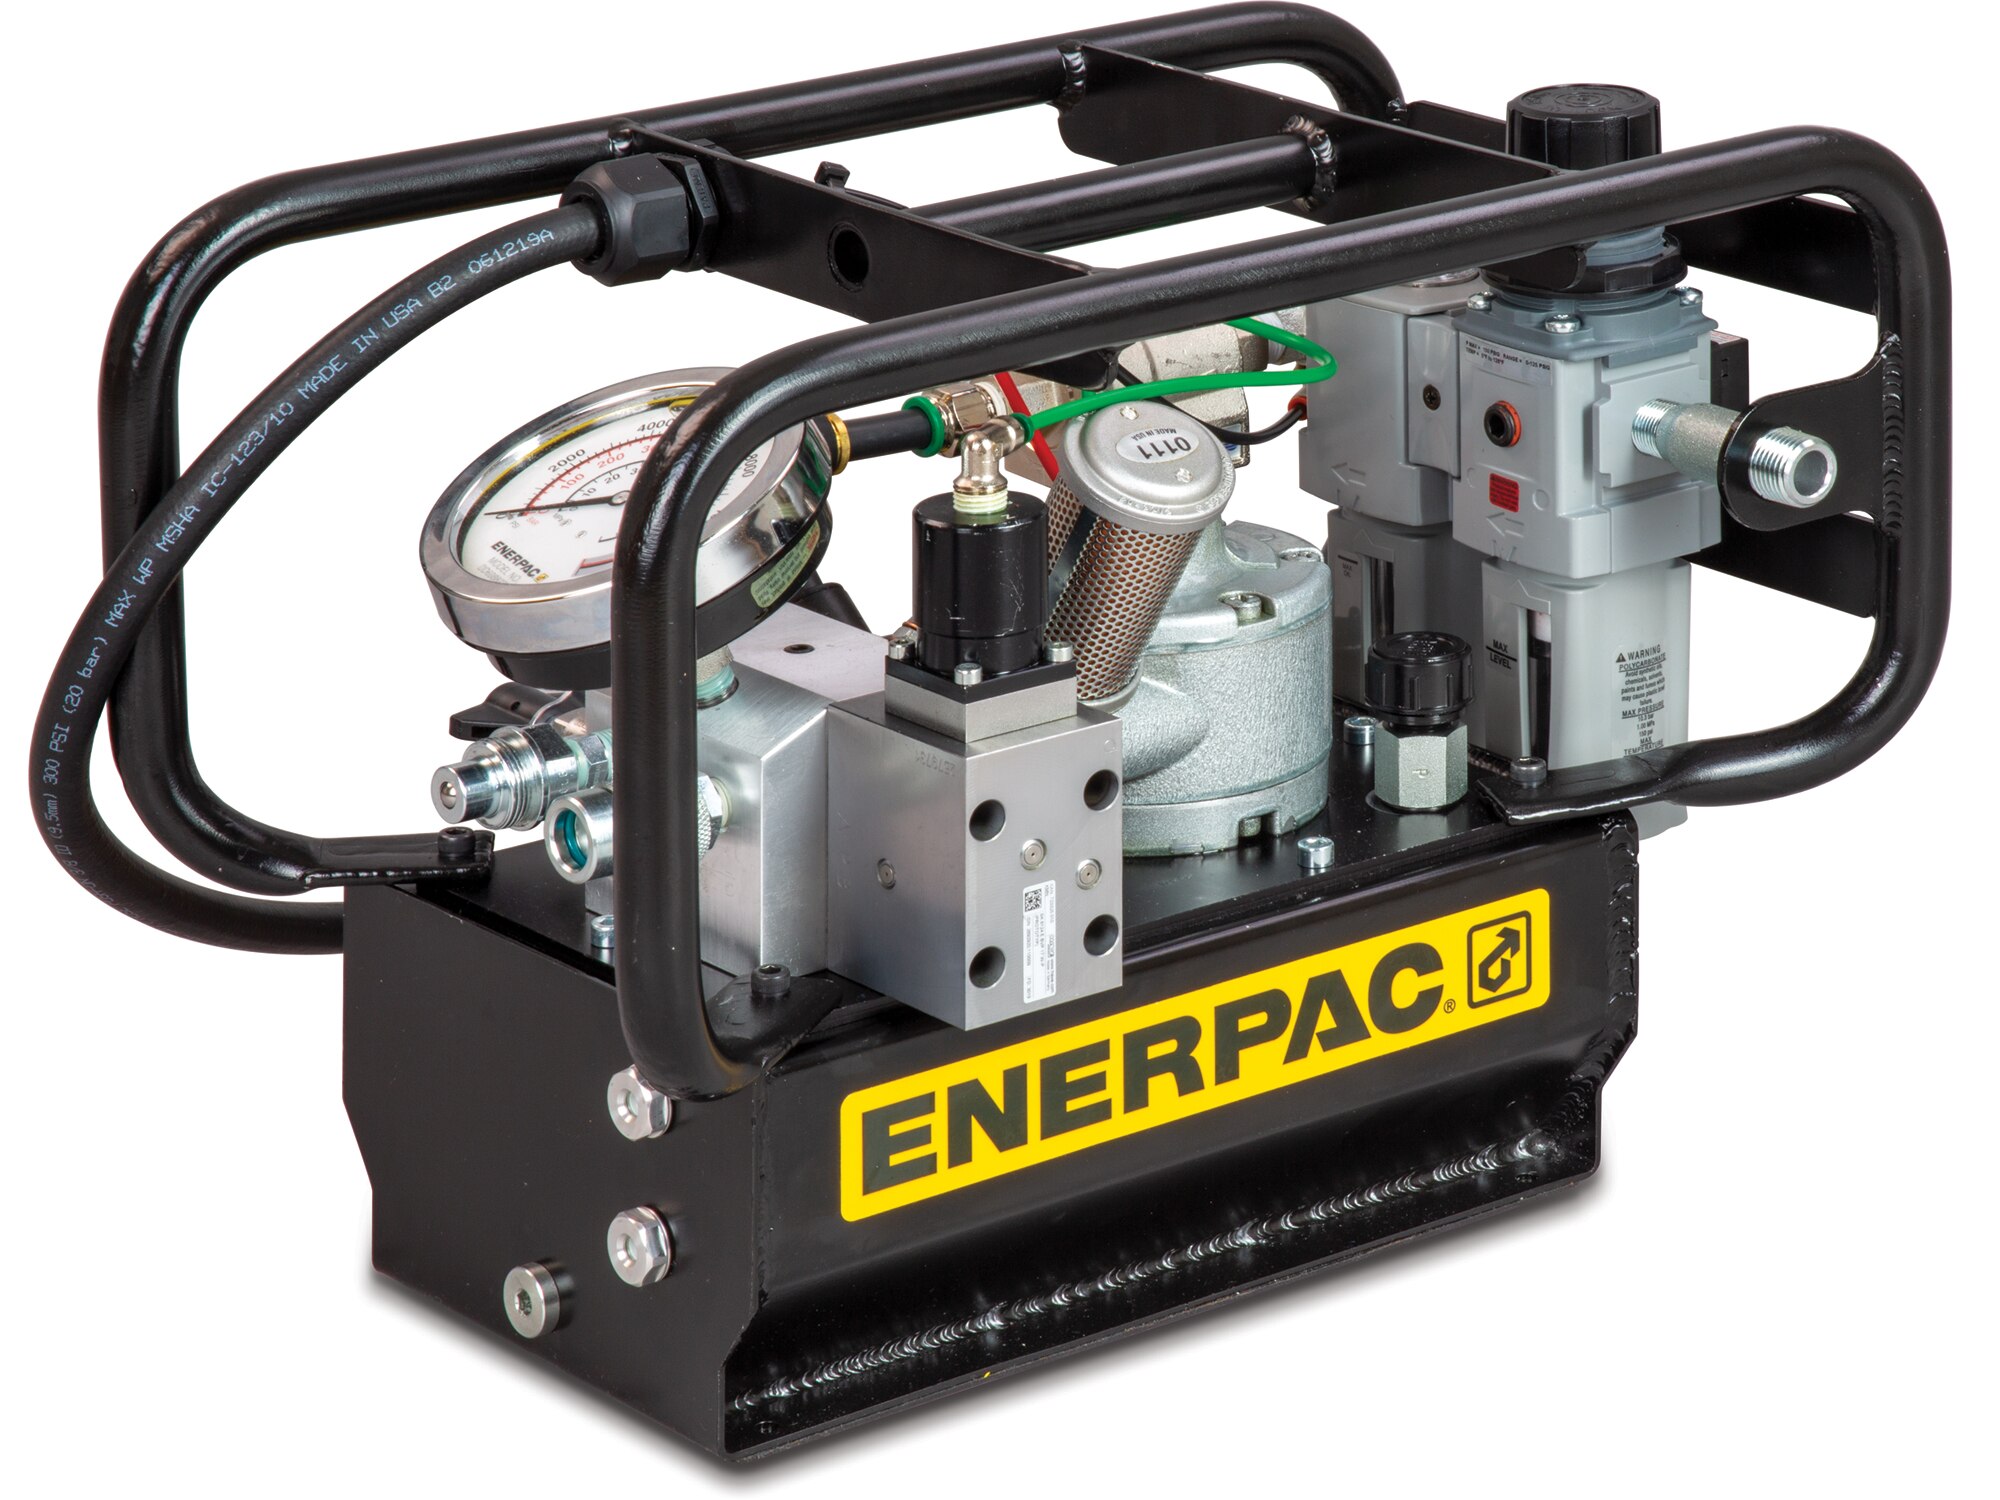 The NEW Lightweight Air Hydraulic Torque Wrench Pump brings